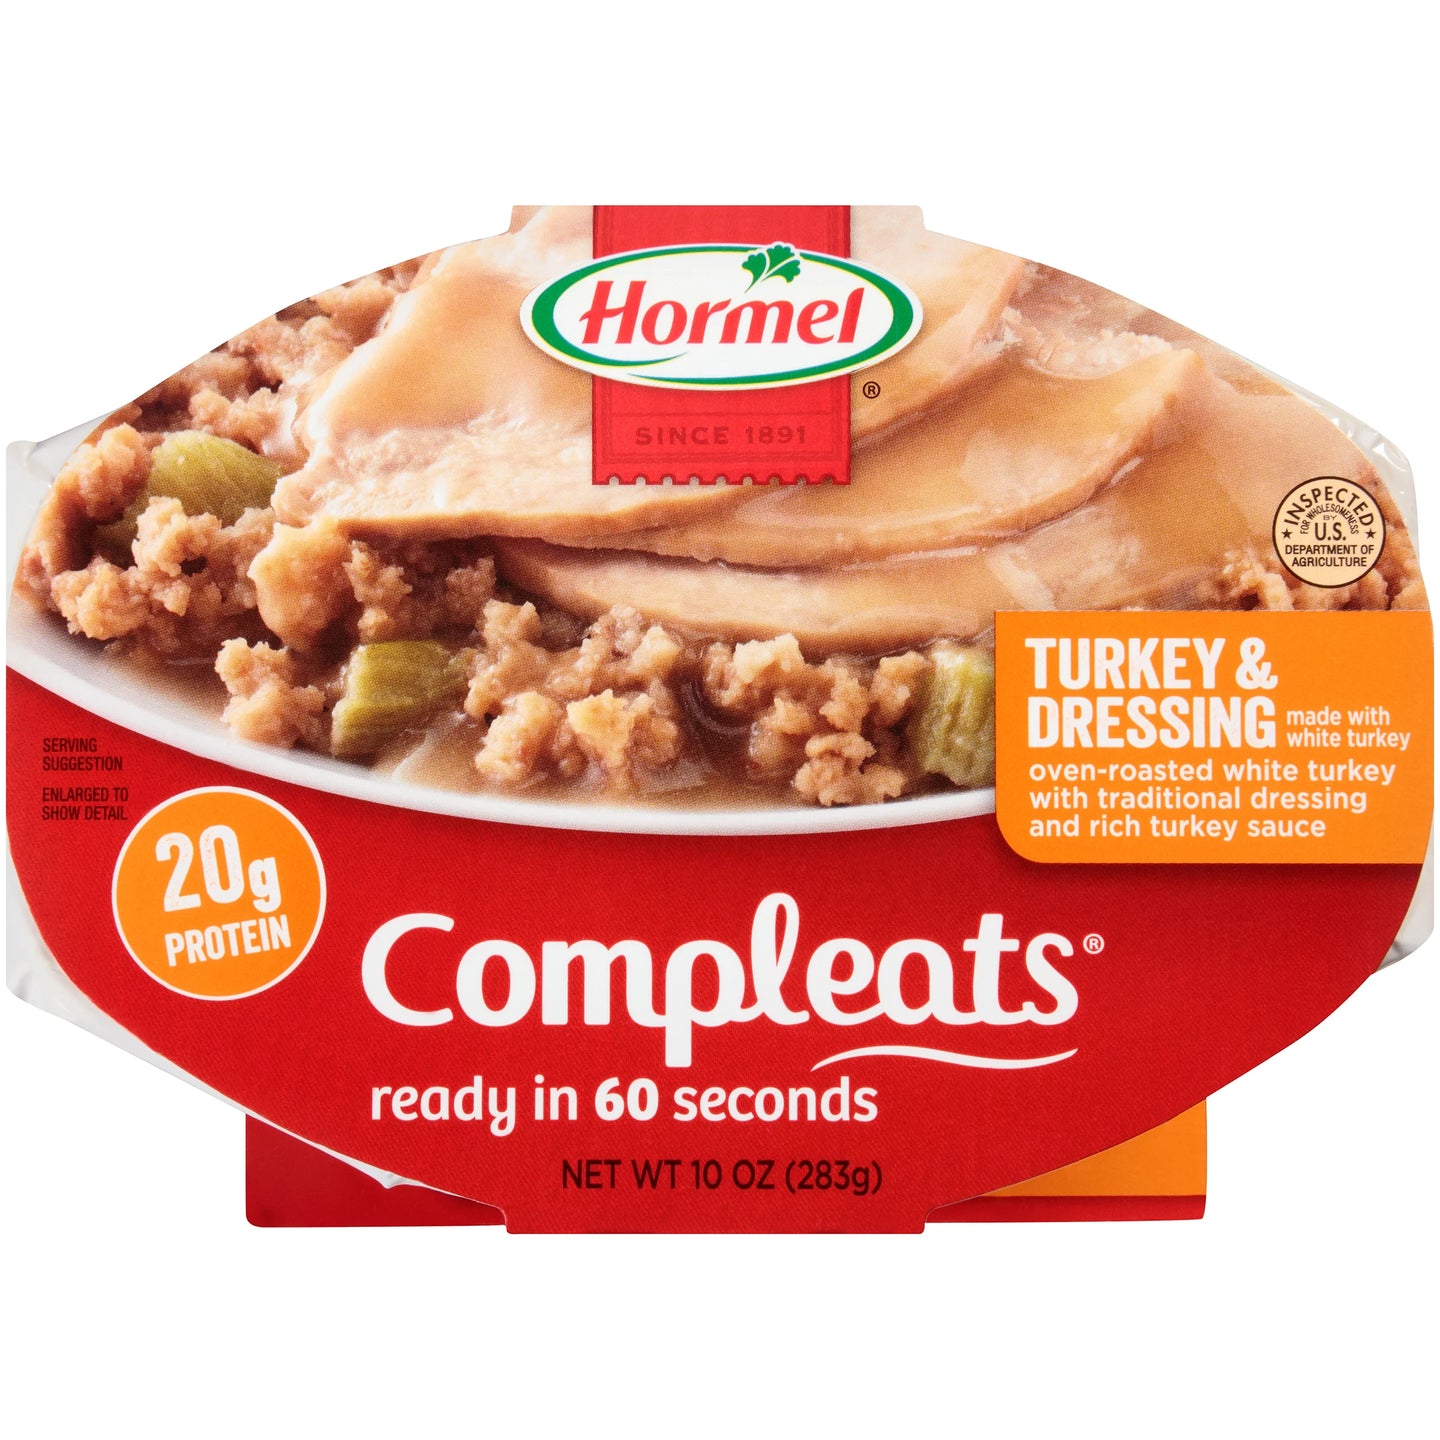 Hormel Compleats Turkey & Dressing Meal